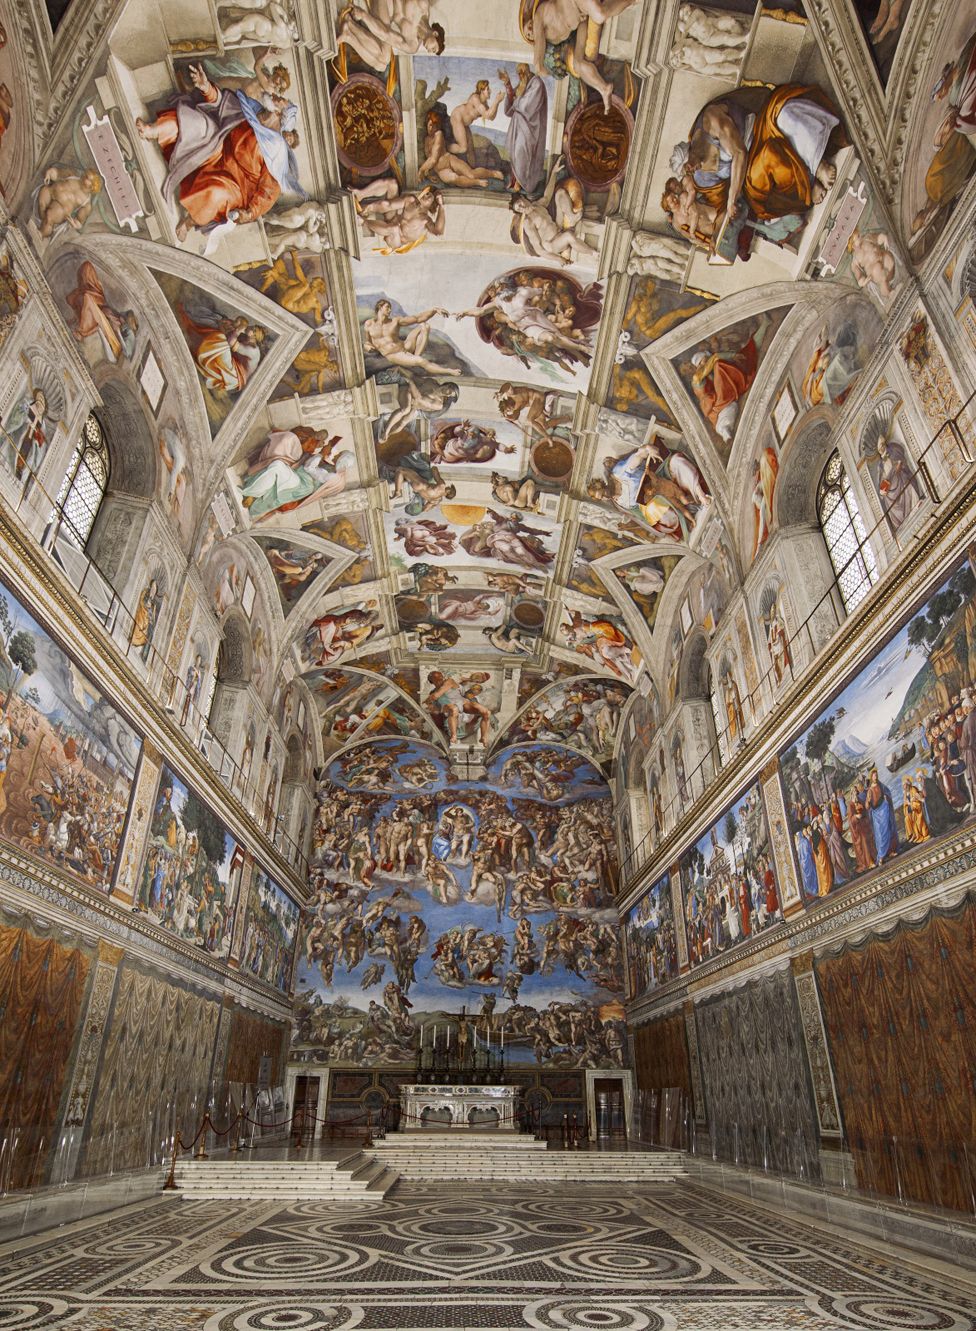 The virtual tour gives you the chance to marvel at the magnificent Sistine Chapel in Vatican City, including Michelangelo's breathtakingly beautiful ceiling